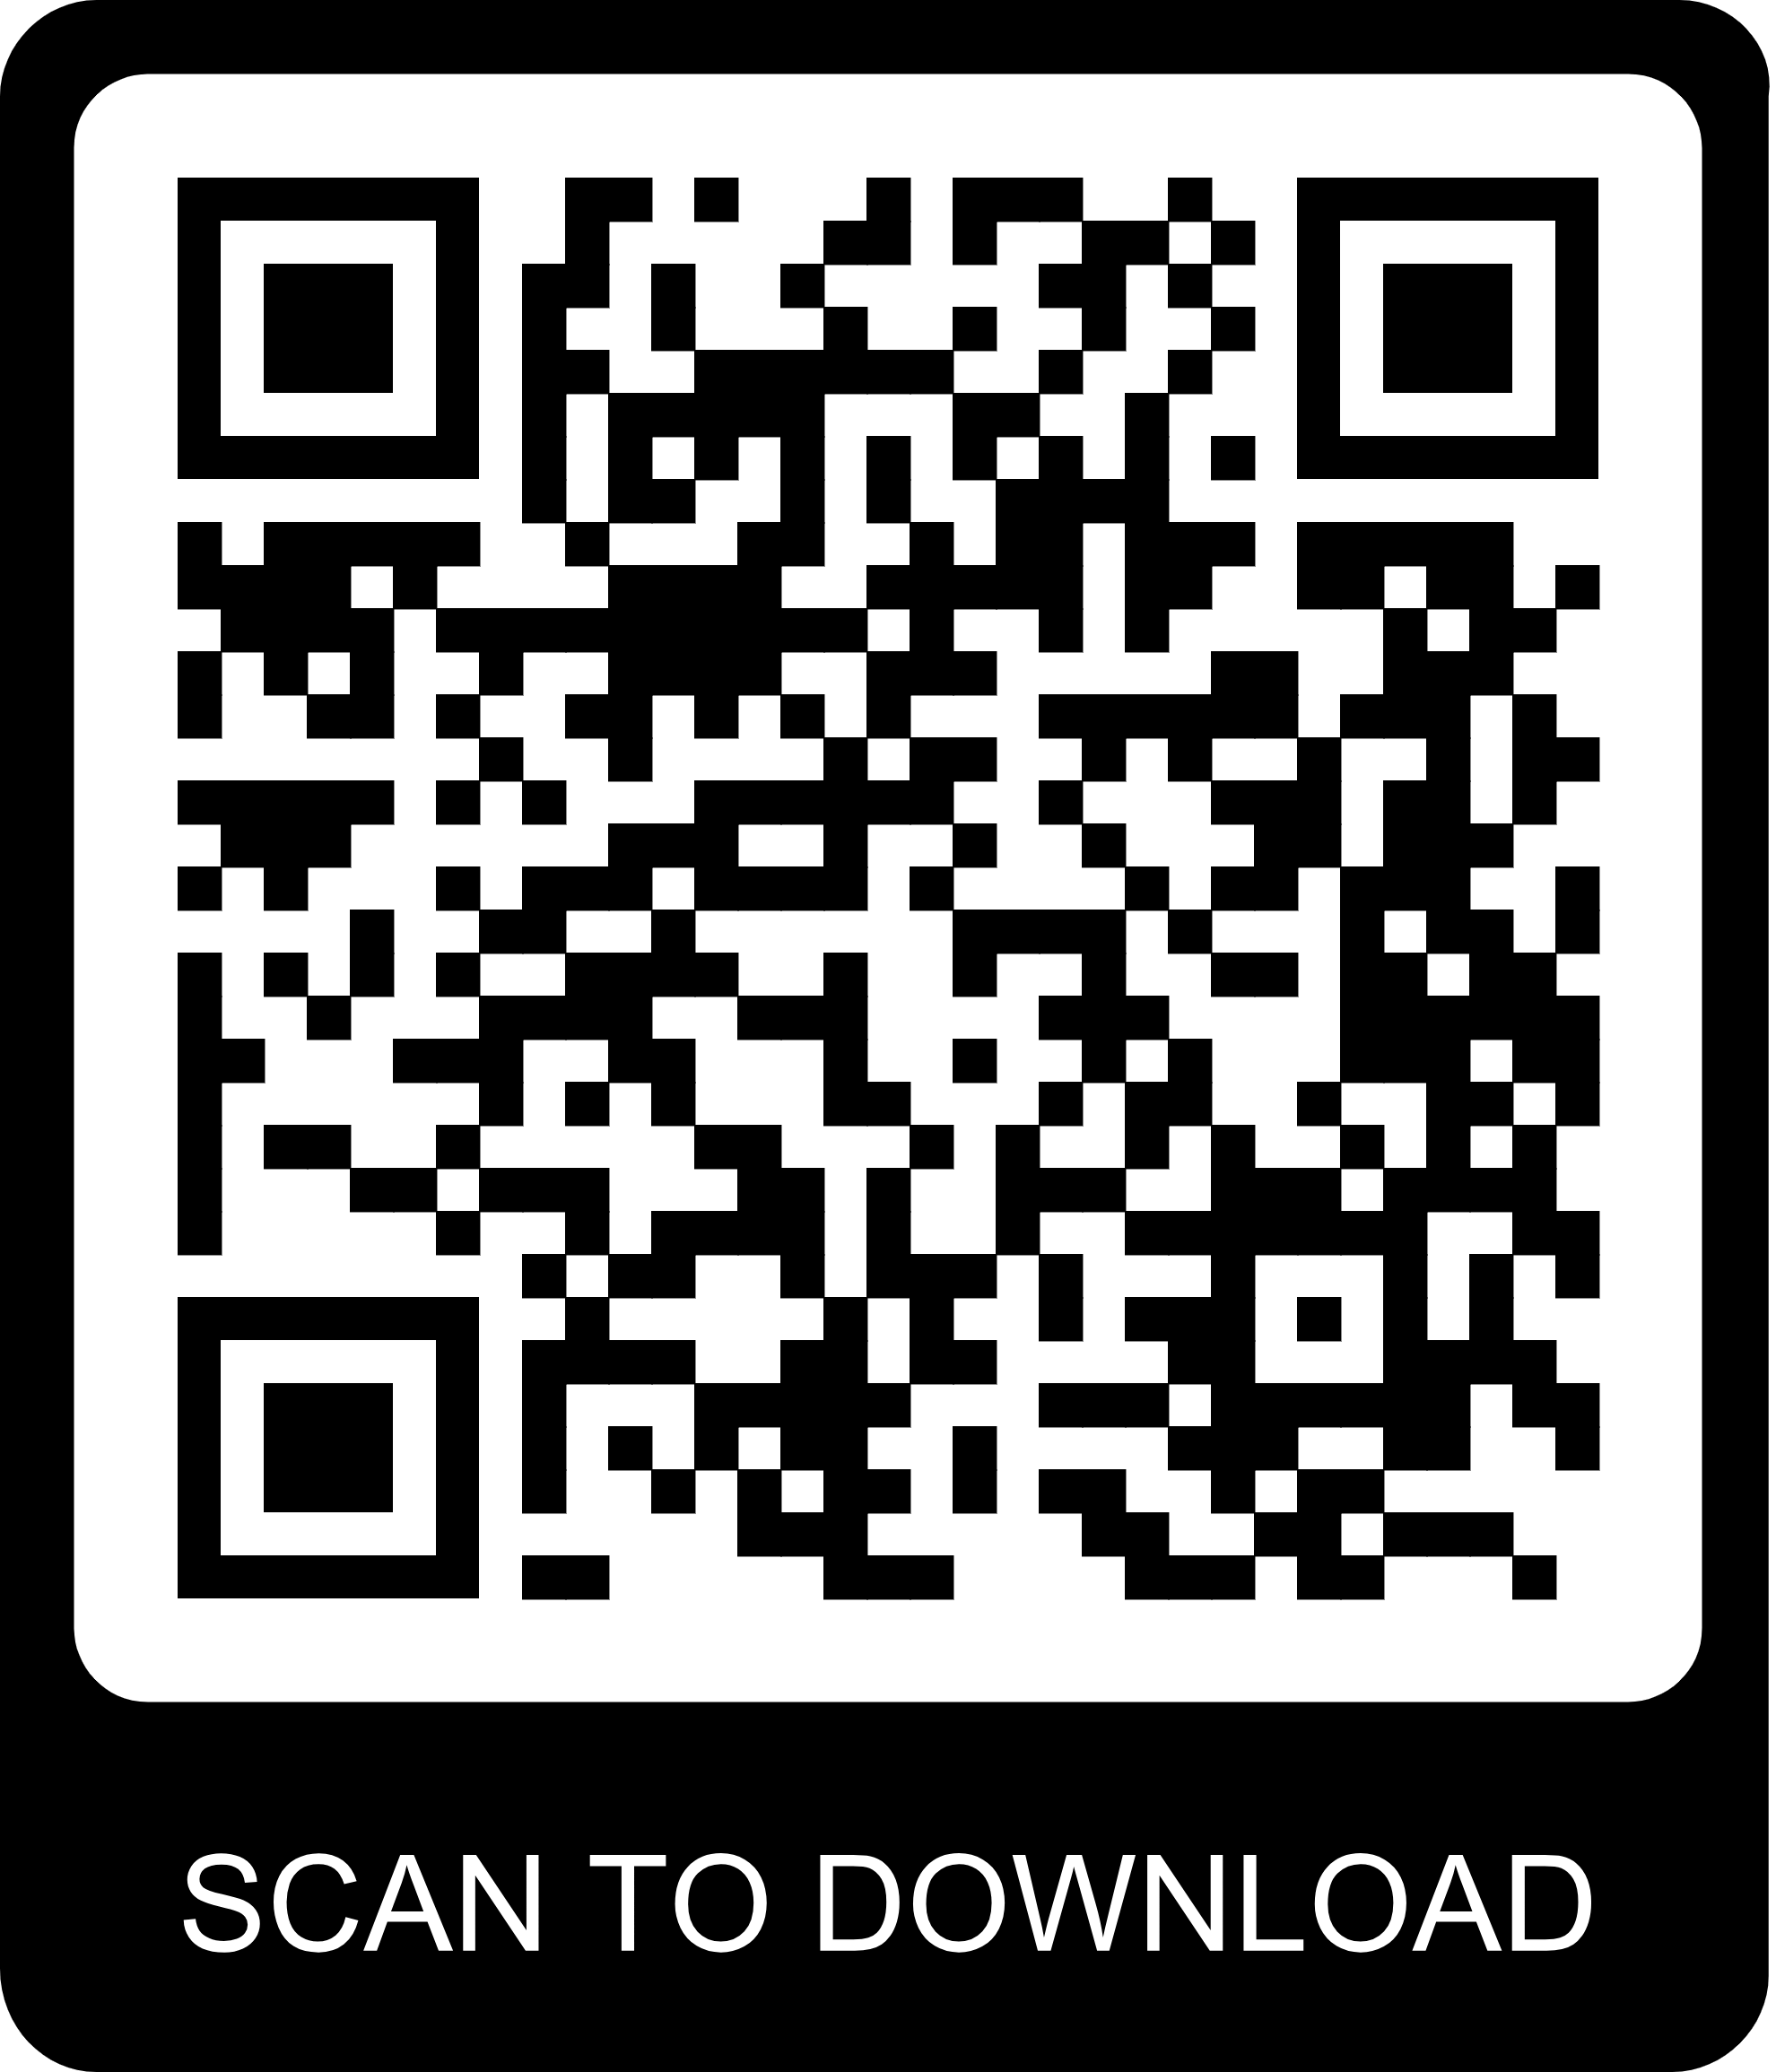 Scan The QR Code To Download Now